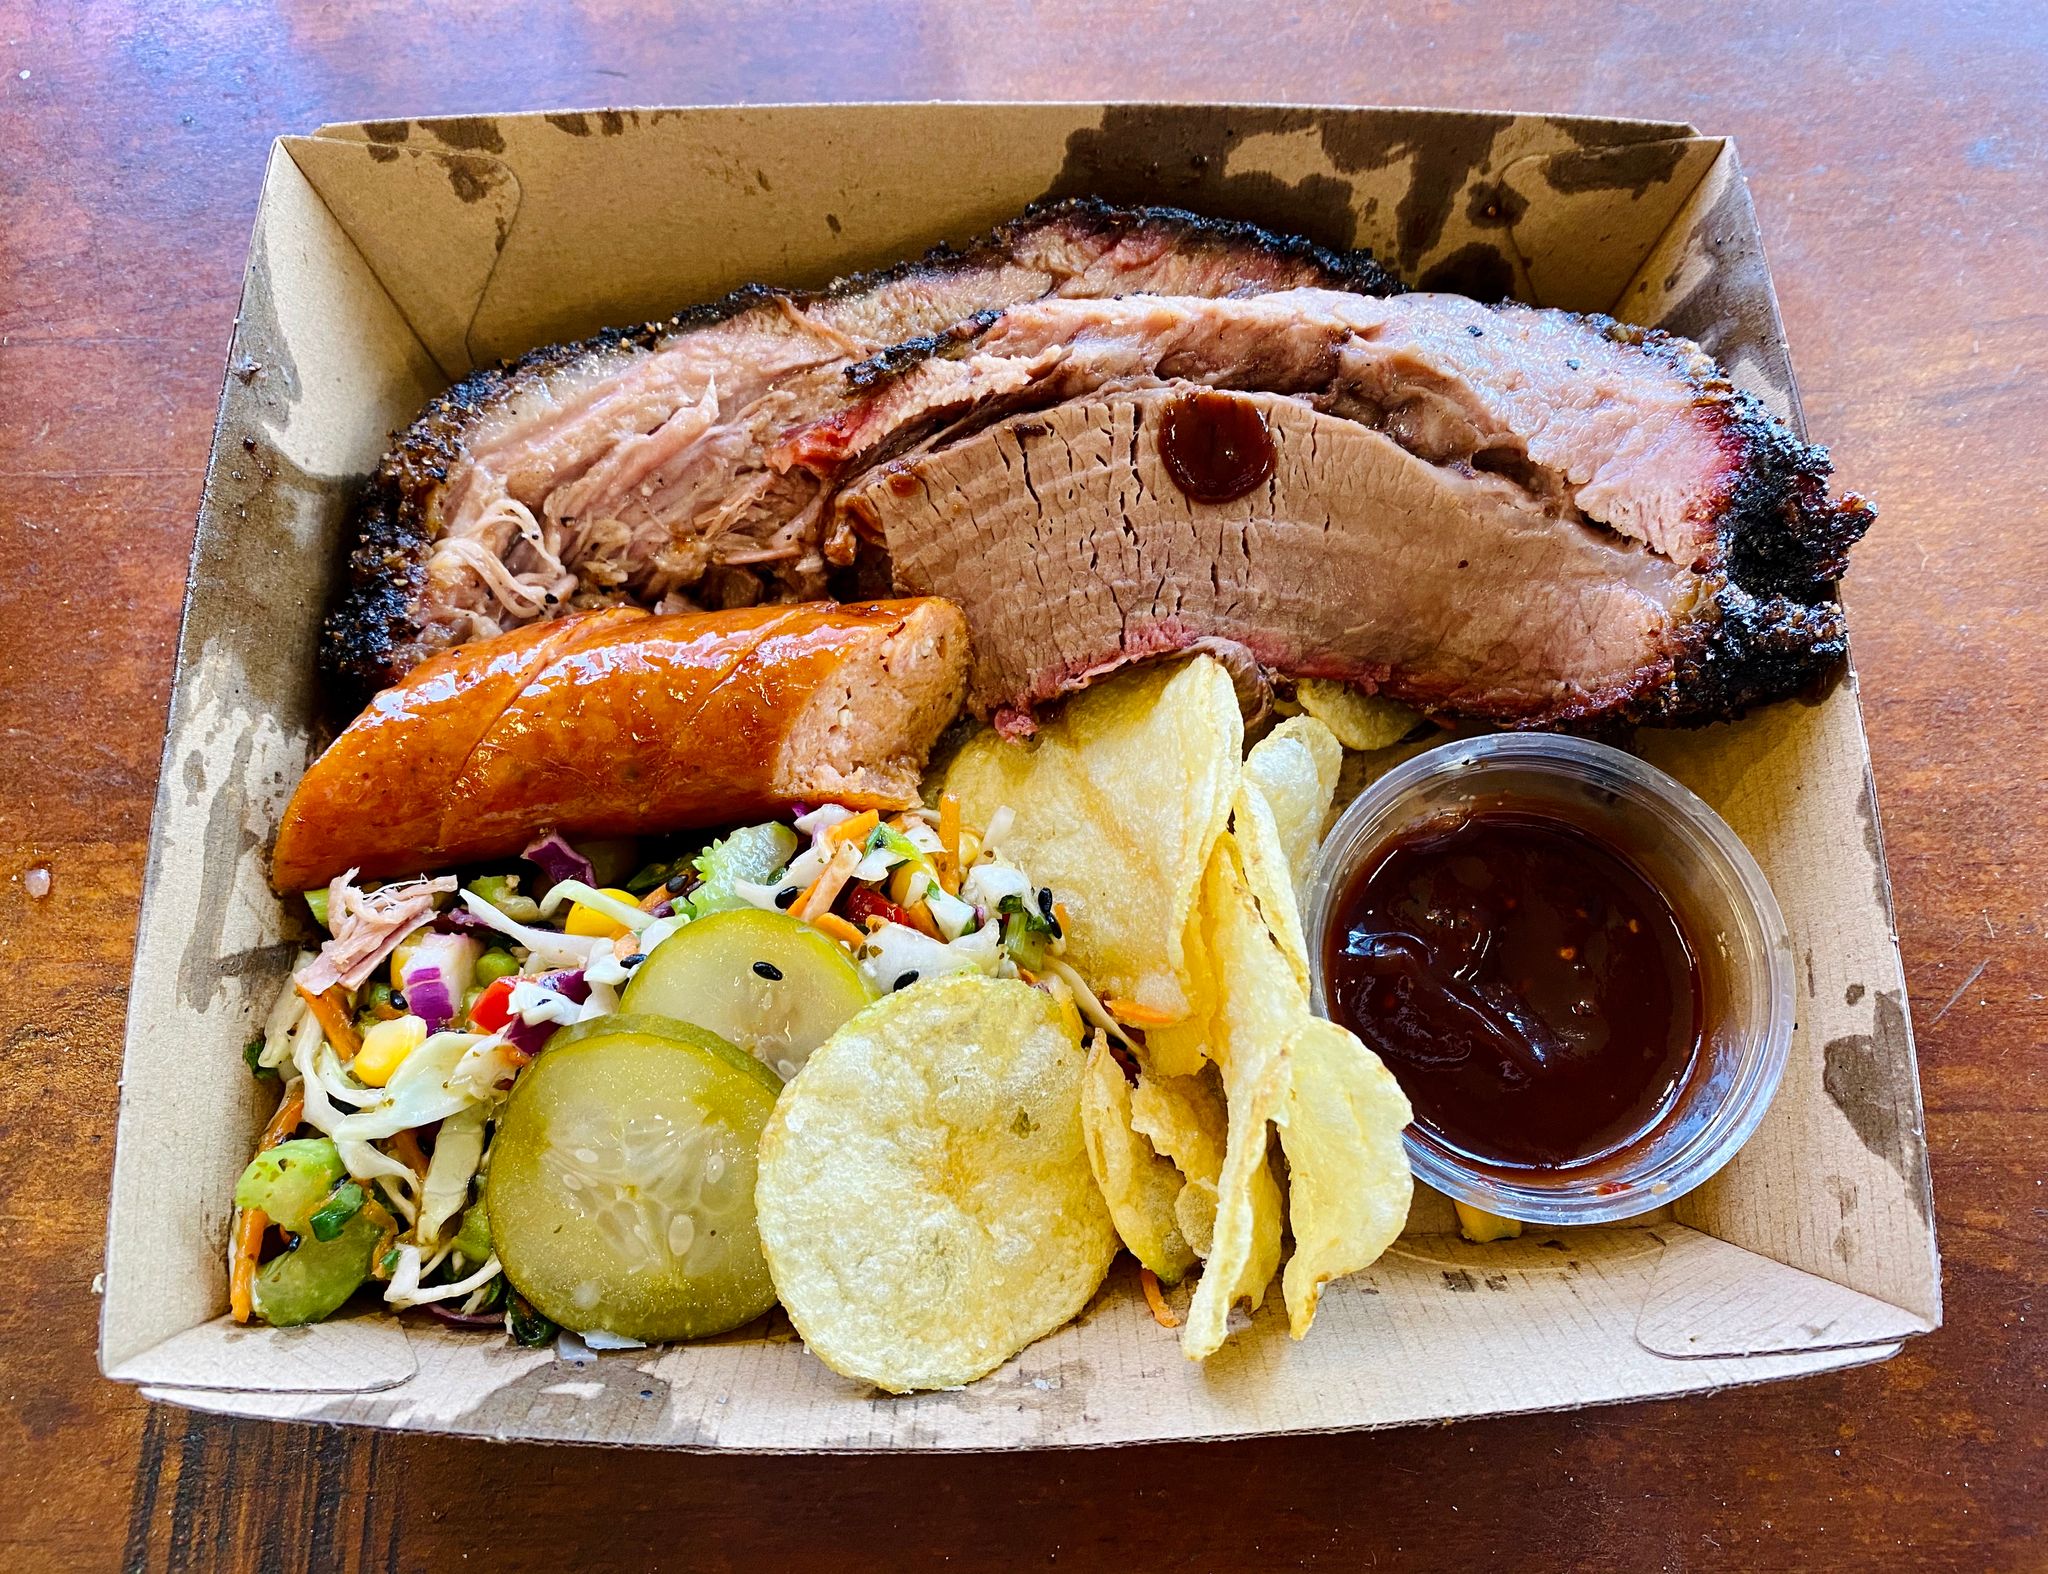 A photo of a cardboard food container with slaw, chips, beef brisket, and some sausage.